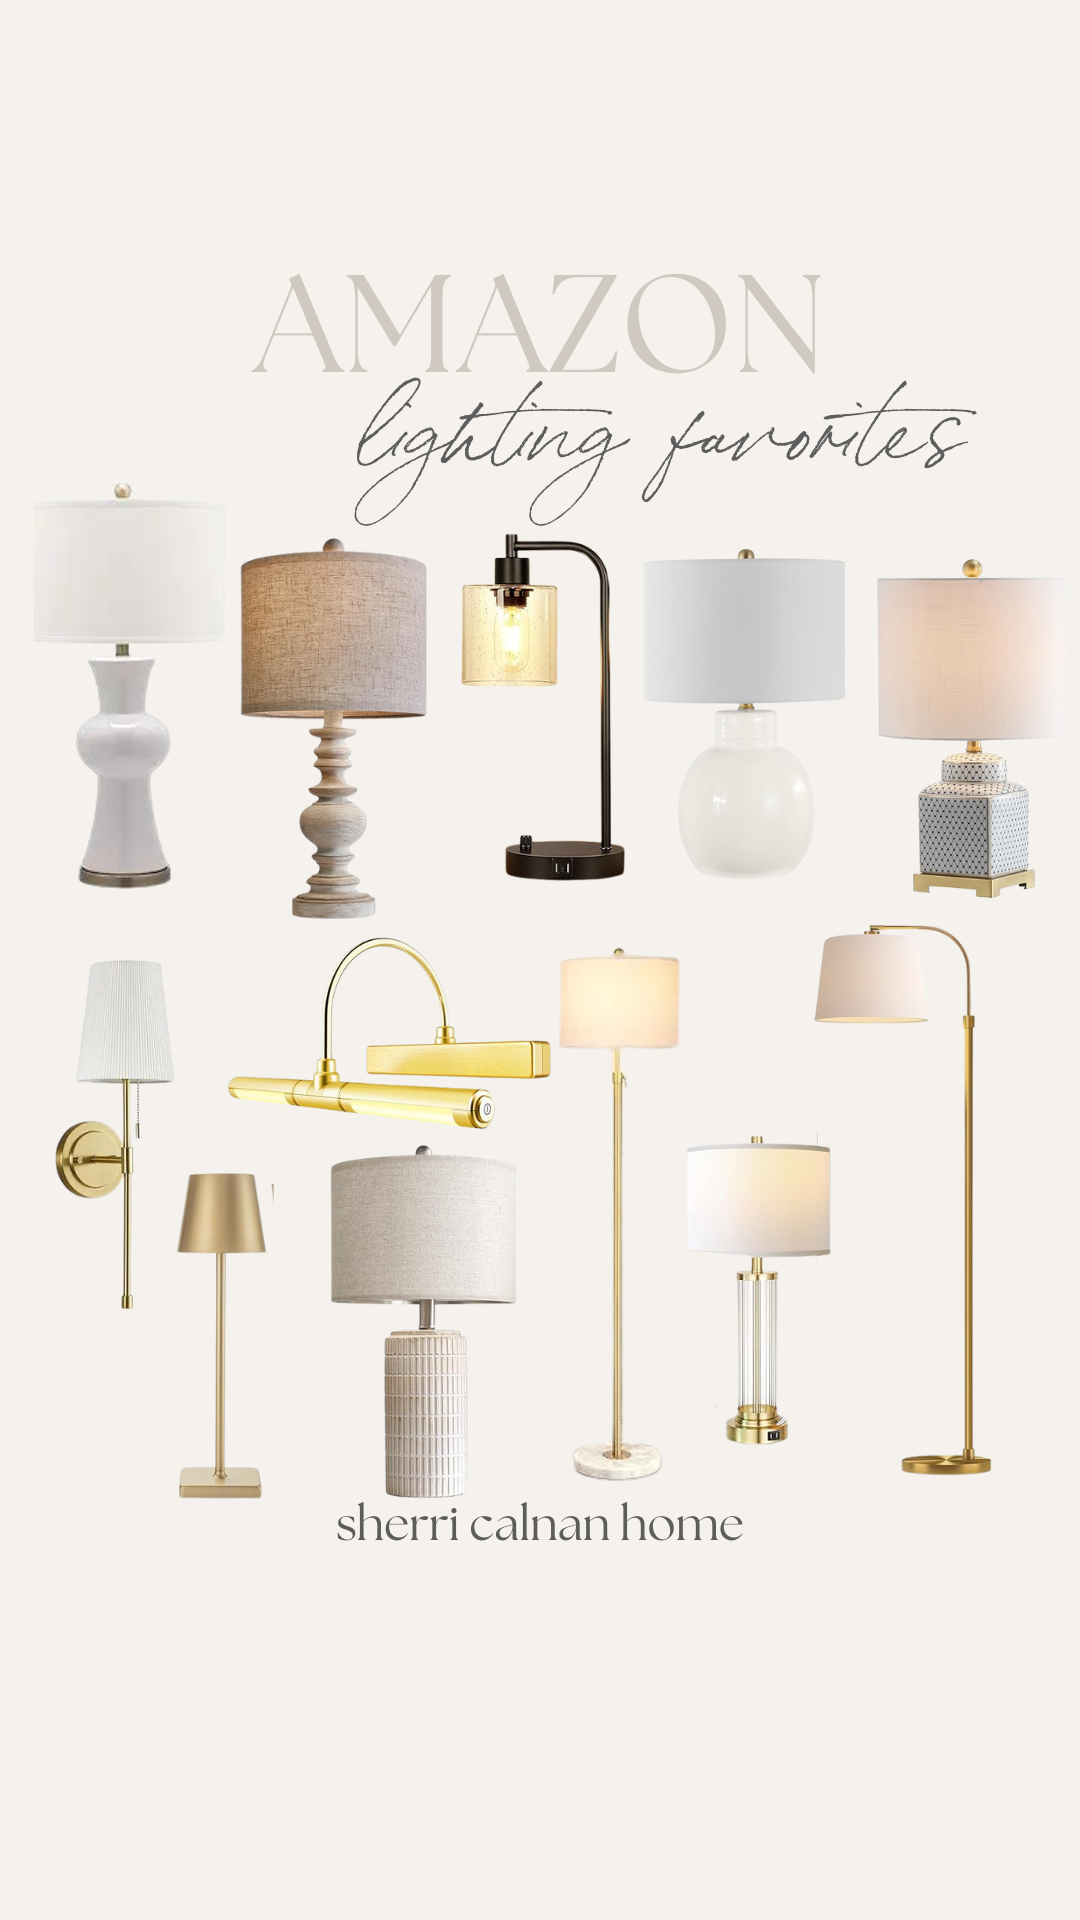 Lighting Round Up, Home lighting, Home decor, modern ambient lighting round-up, Home inspo, Home styling, Home, Lighting collages, lighting finds, home finds, target lighting, large lamps, small lamps, target lamp